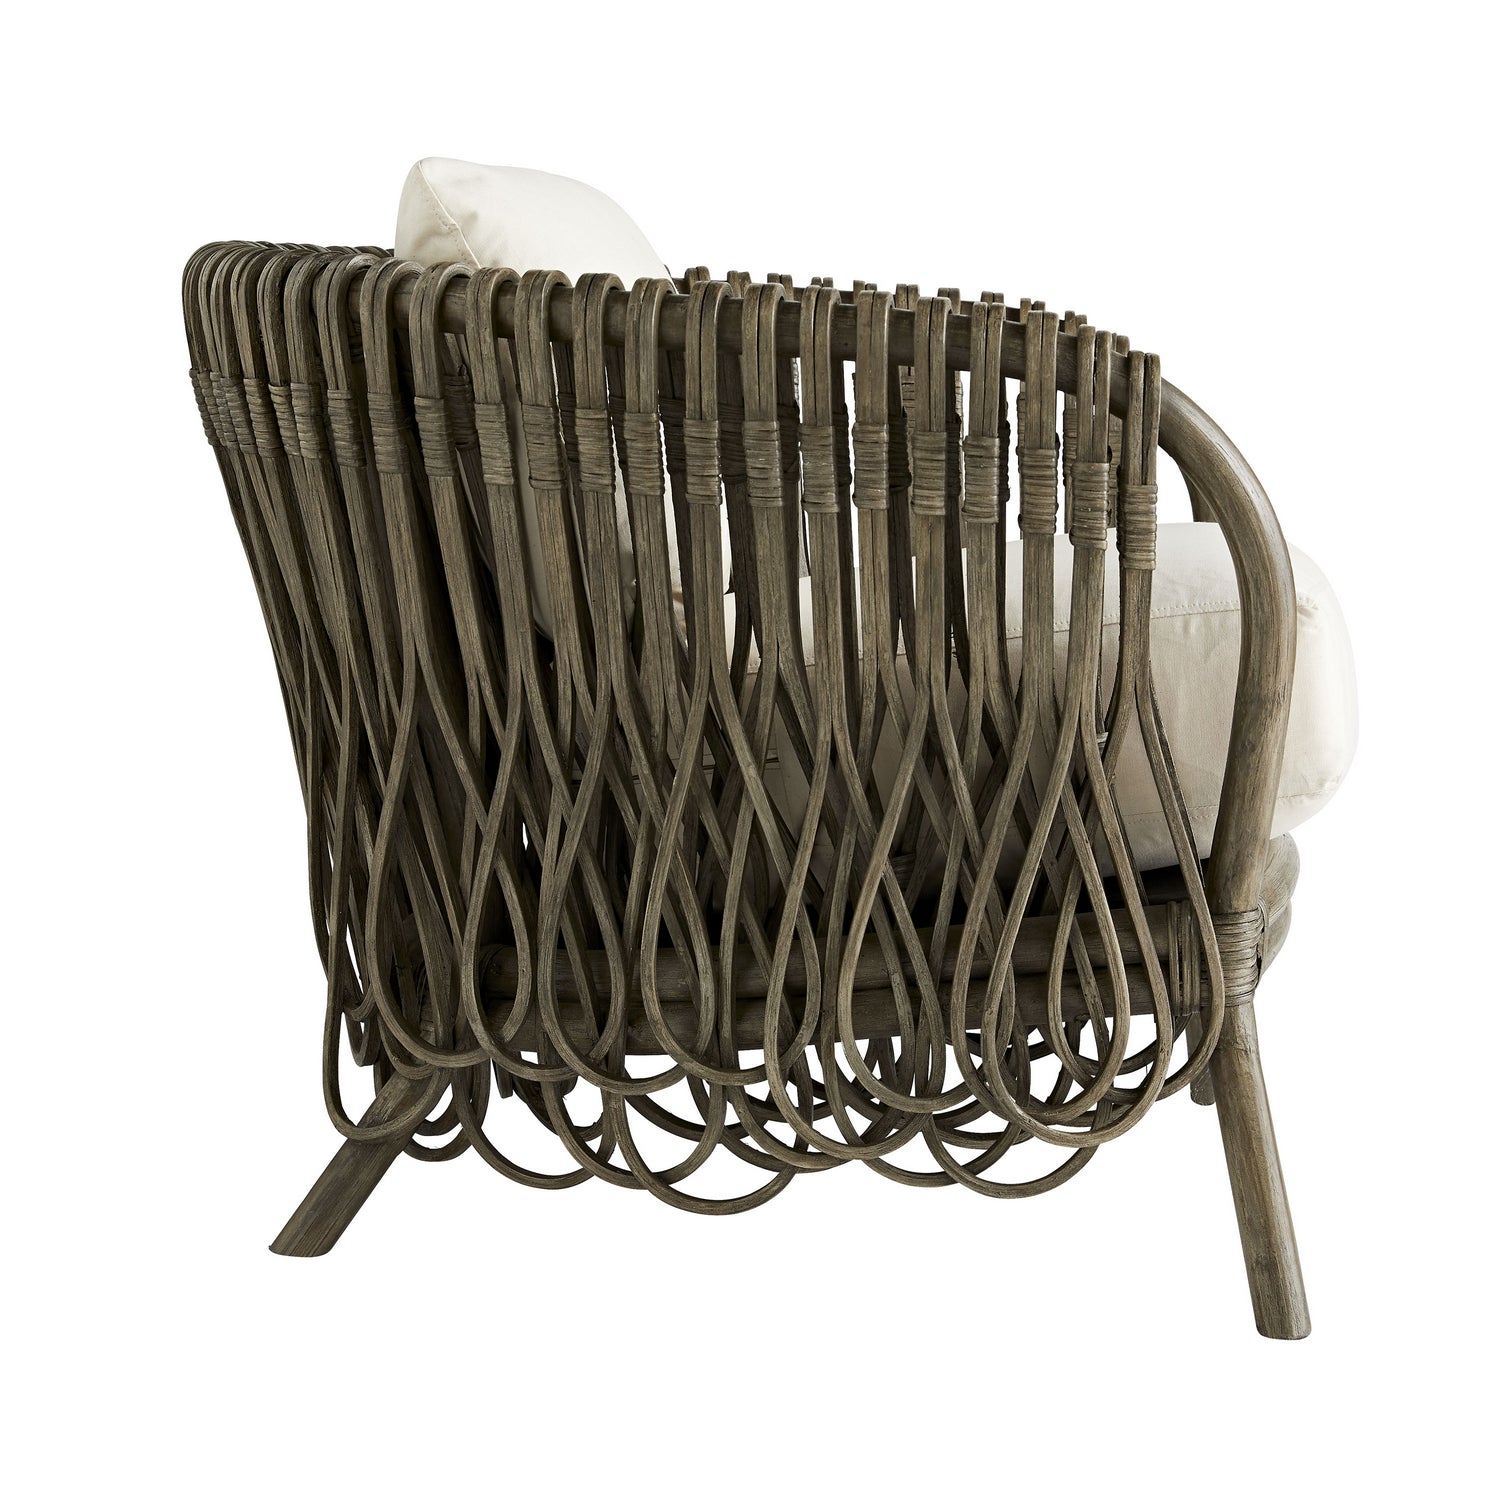 Chair from the Lightwash collection in Gray Wash finish